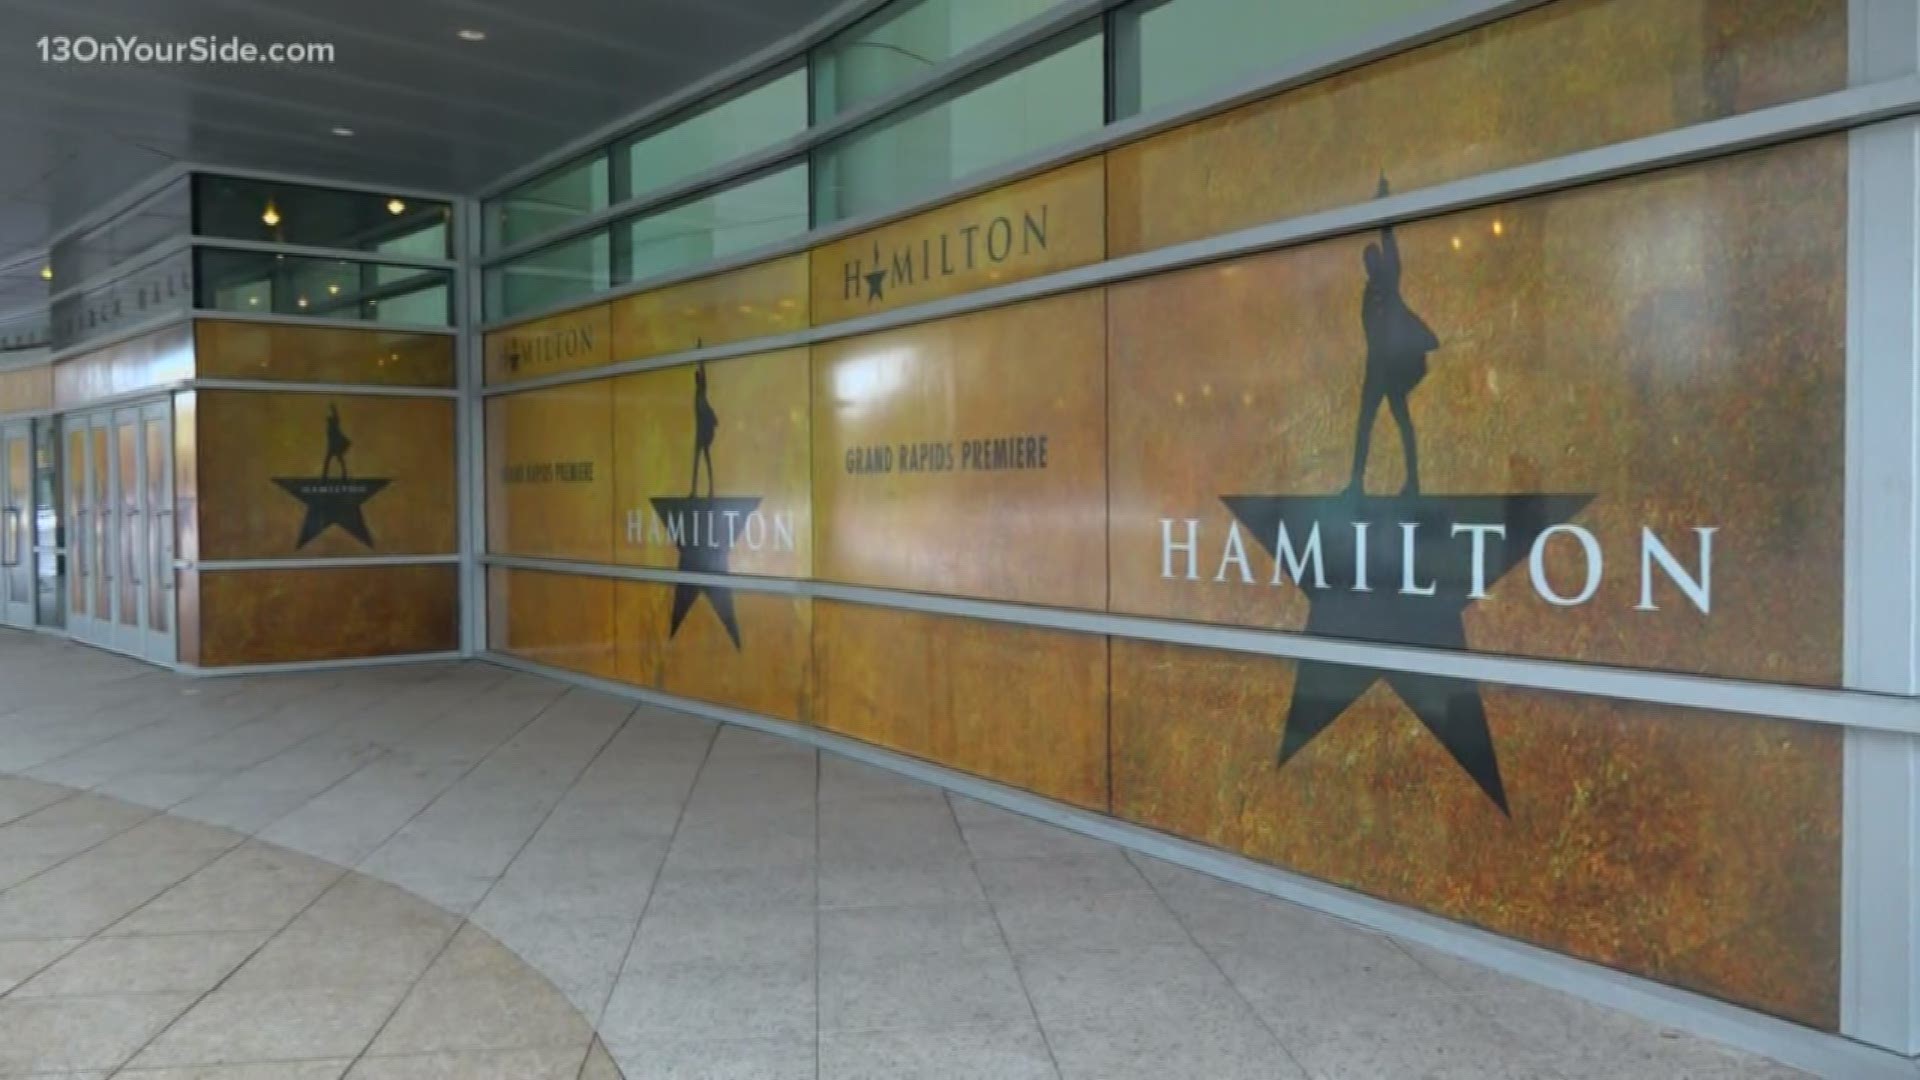 The Broadway sensation Hamilton has officially started in Grand Rapids, and fans of the show could have the chance to see it for just $10.